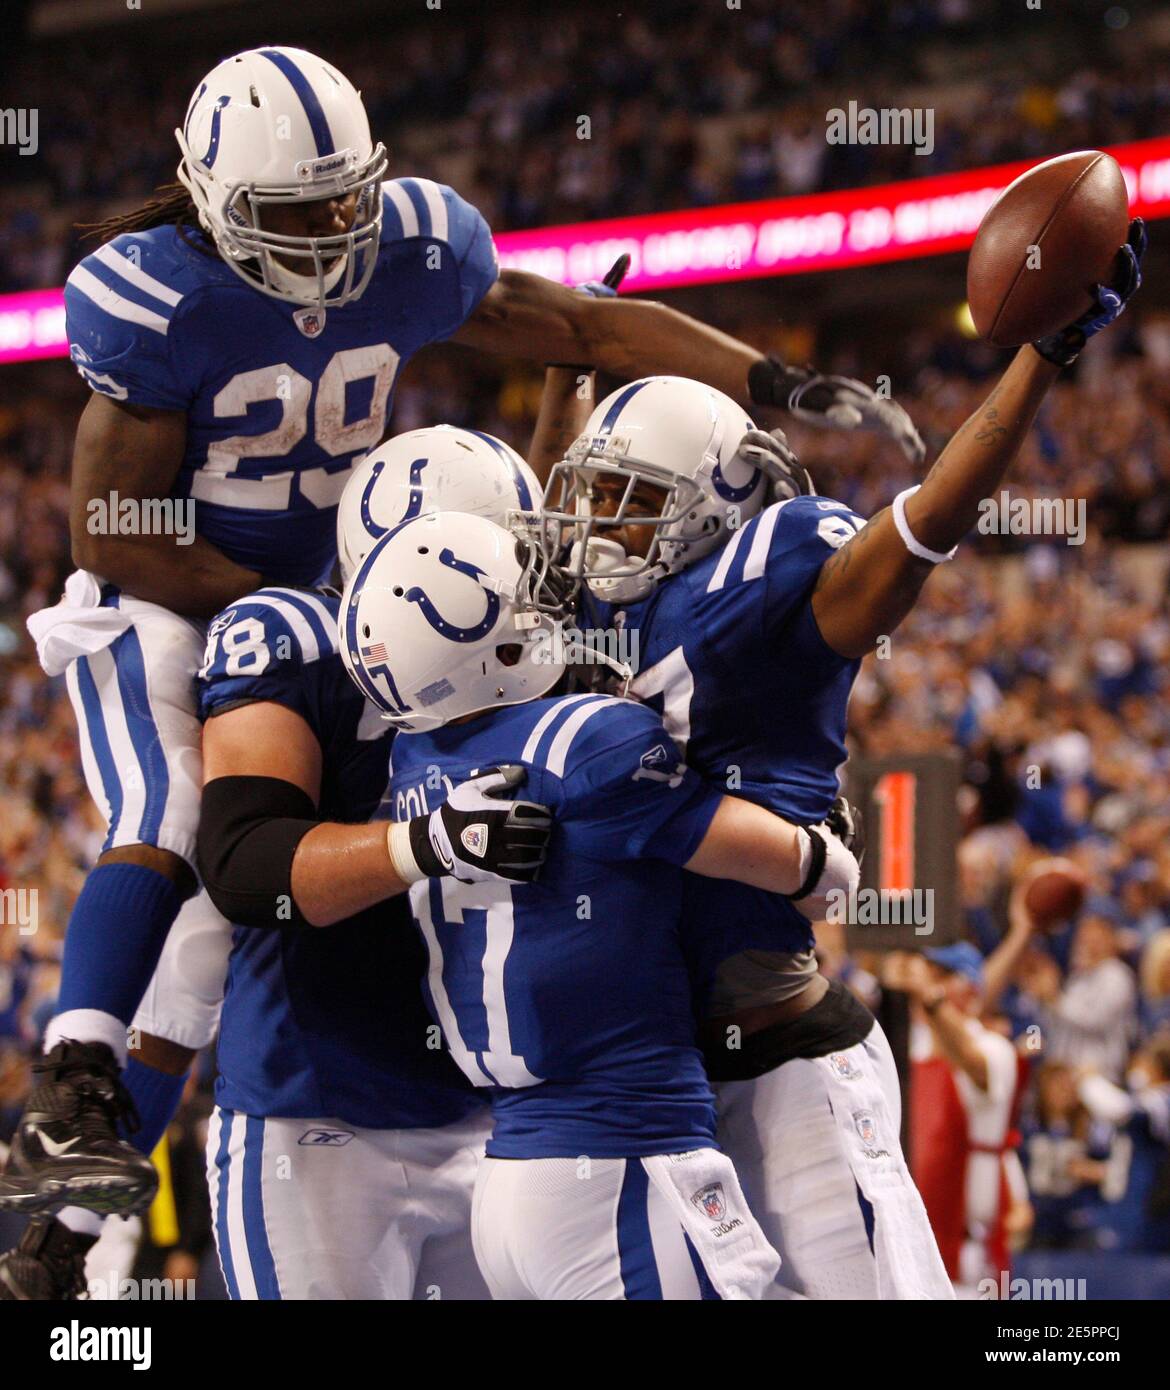 Indianapolis Colts running back Joseph Addai (29), Colts offensive guard Mike Pollak, Colts wide receiver Austin Collie (17) and Colts wide receiver Reggie Wayne (R) celebrate Wayne's touchdown catch during the fourth quarter of their NFL football game against the Houston Texans in Indianapolis December 22, 2011. REUTERS/Brent Smith (UNITED STATES - Tags: SPORT FOOTBALL TPX IMAGES OF THE DAY) Stock Photo